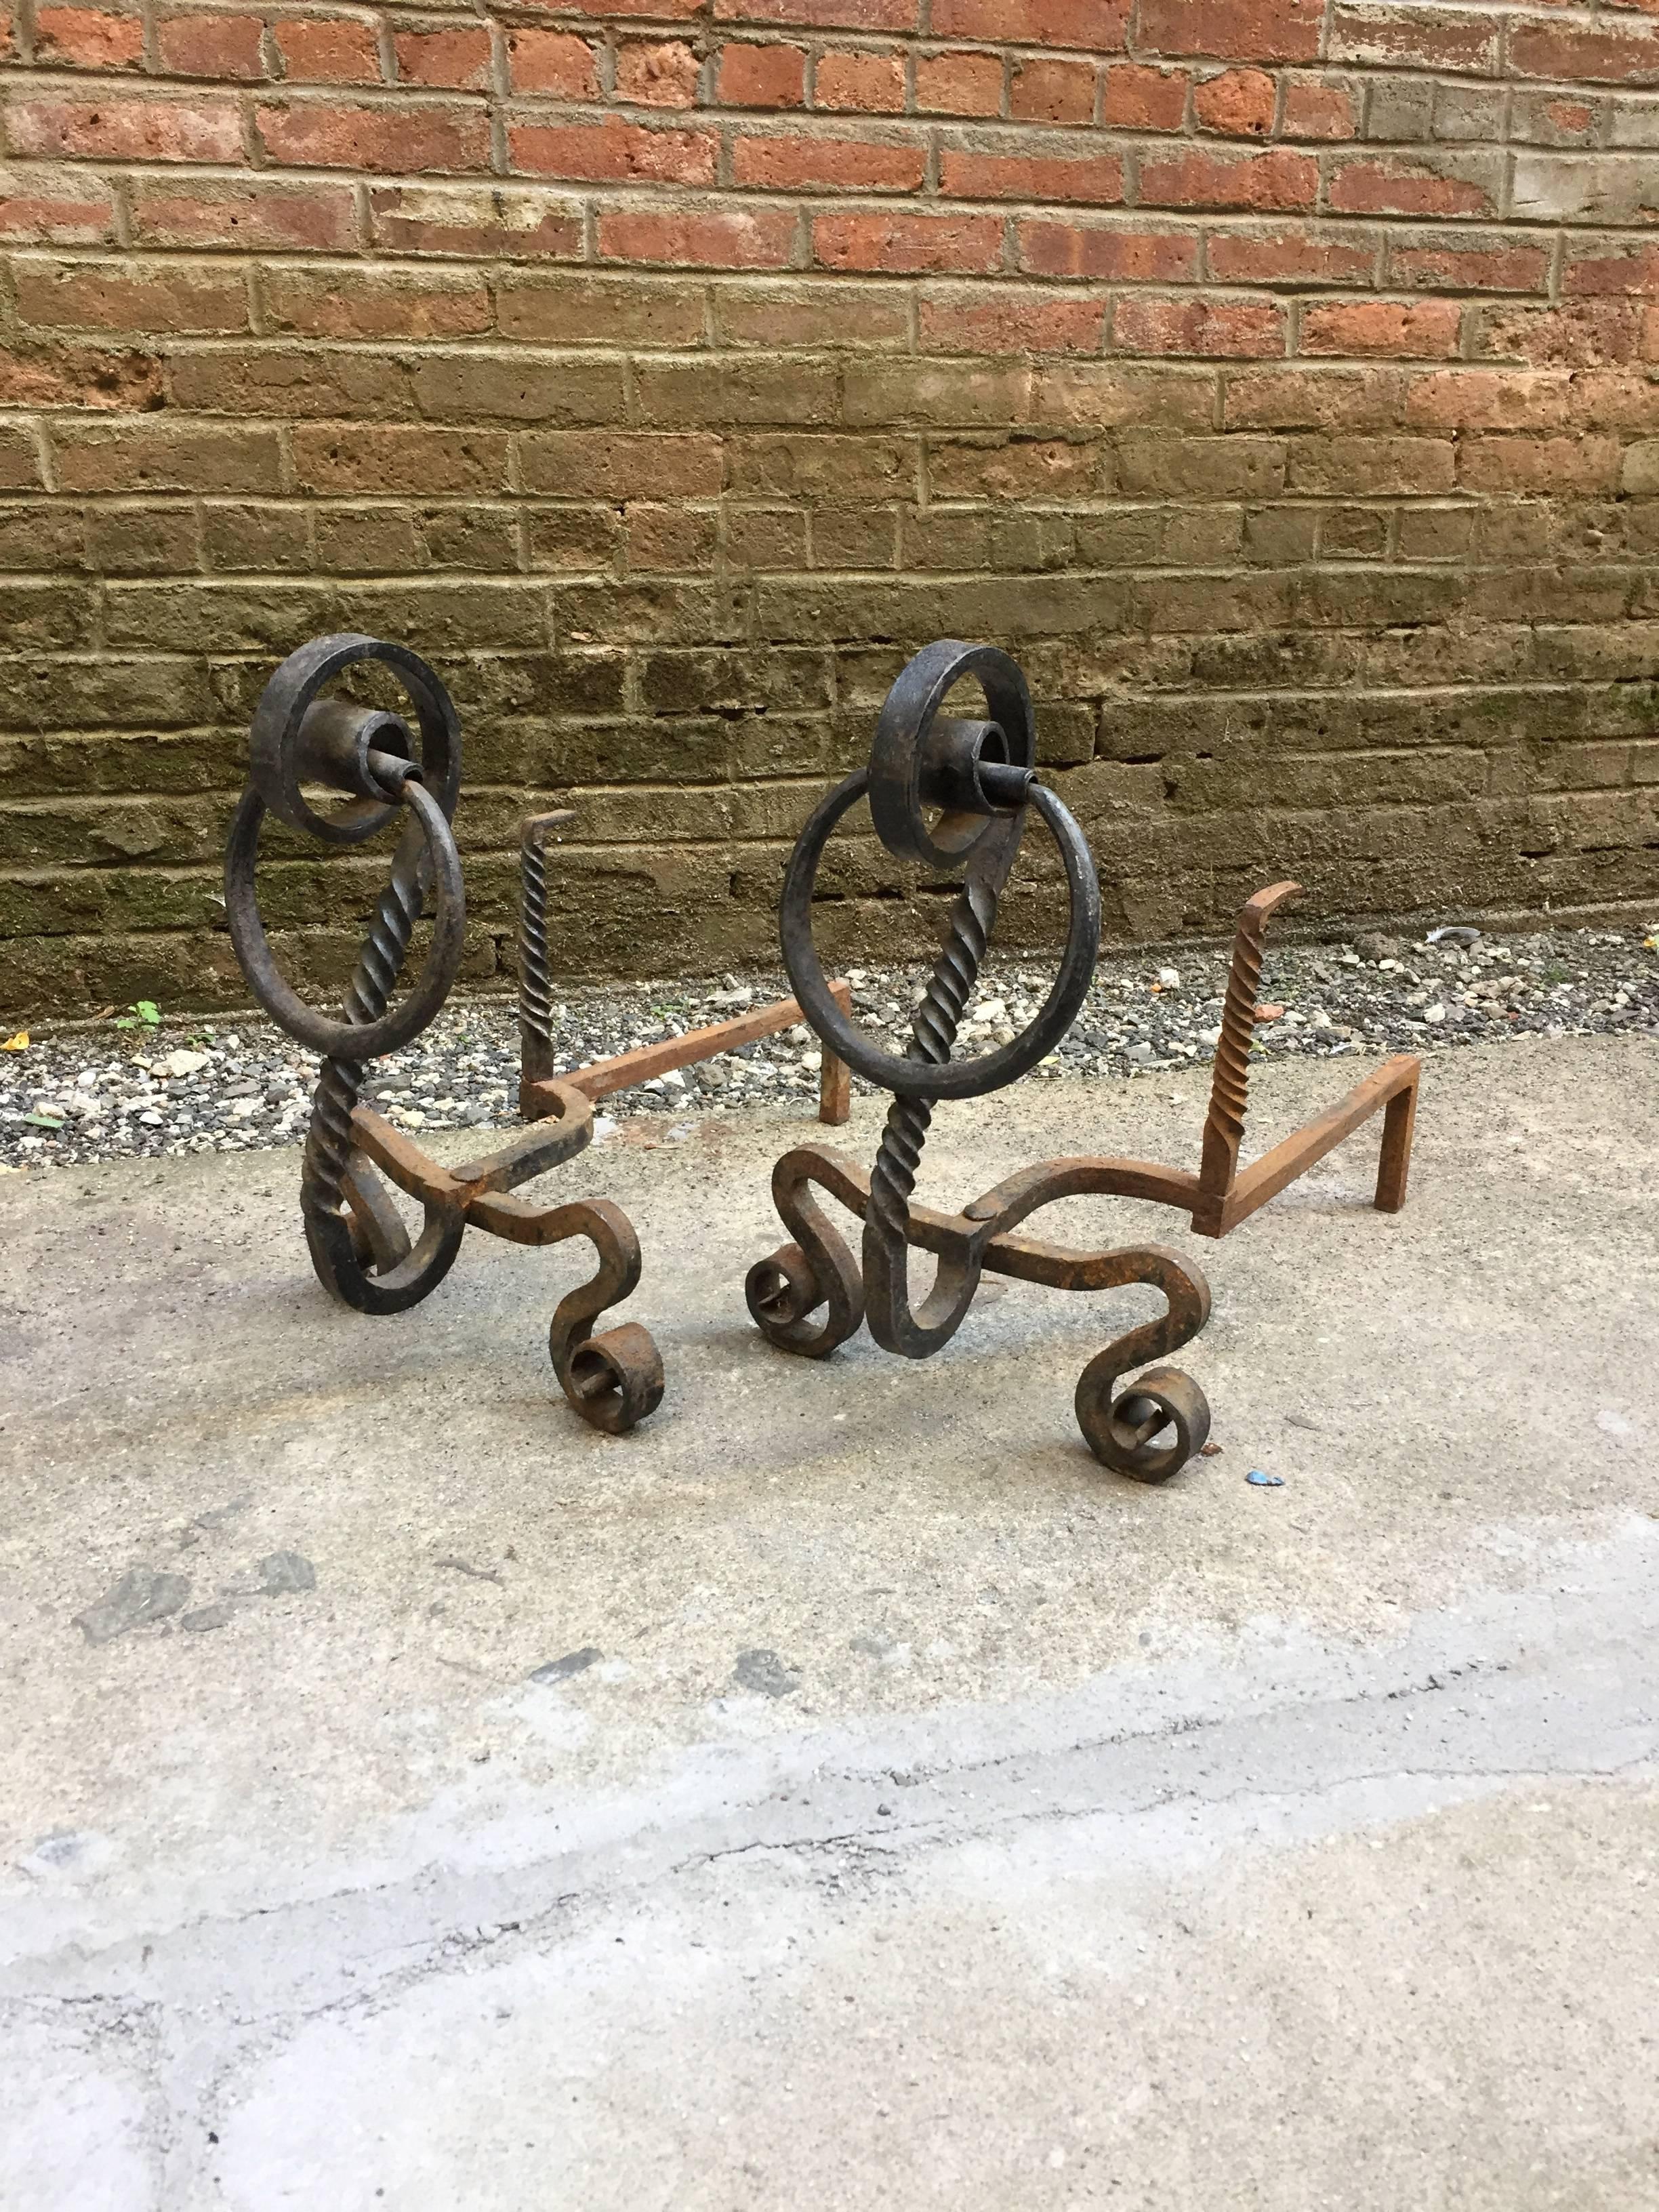 Pair of early serpentine scrolled and twisted andirons. Beautifully hand-wrought, circa 1870-1880. They could possibly earlier.